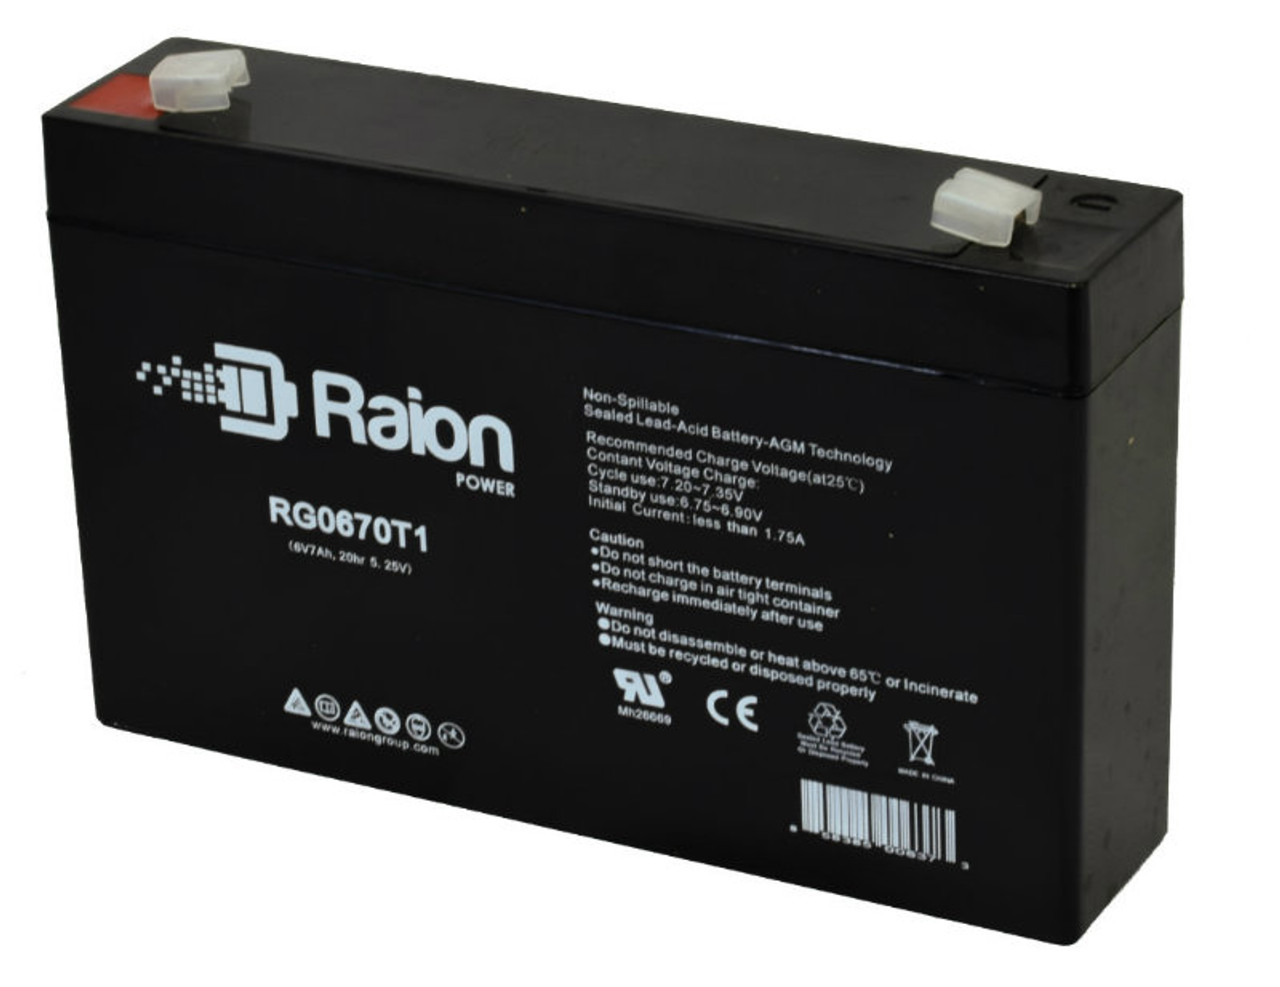 Raion Power RG0670T1 6V 7Ah Replacement Emergency Lighting Battery for Dual Lite 12-561